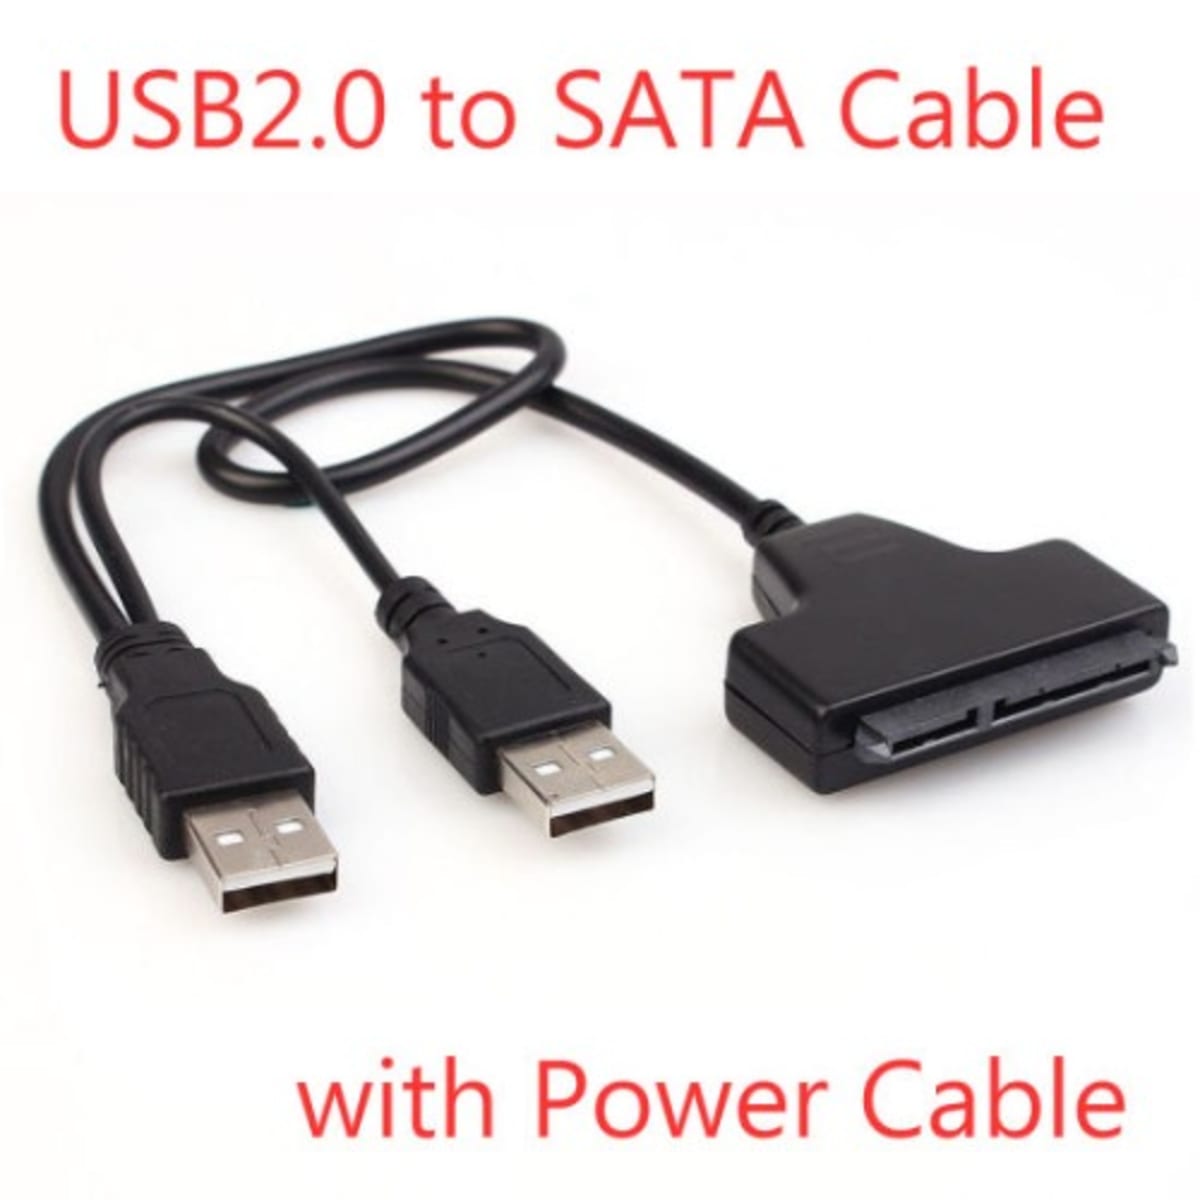 Buy SATA3.0 to USB 3.0 Hard Disk Cable Online at